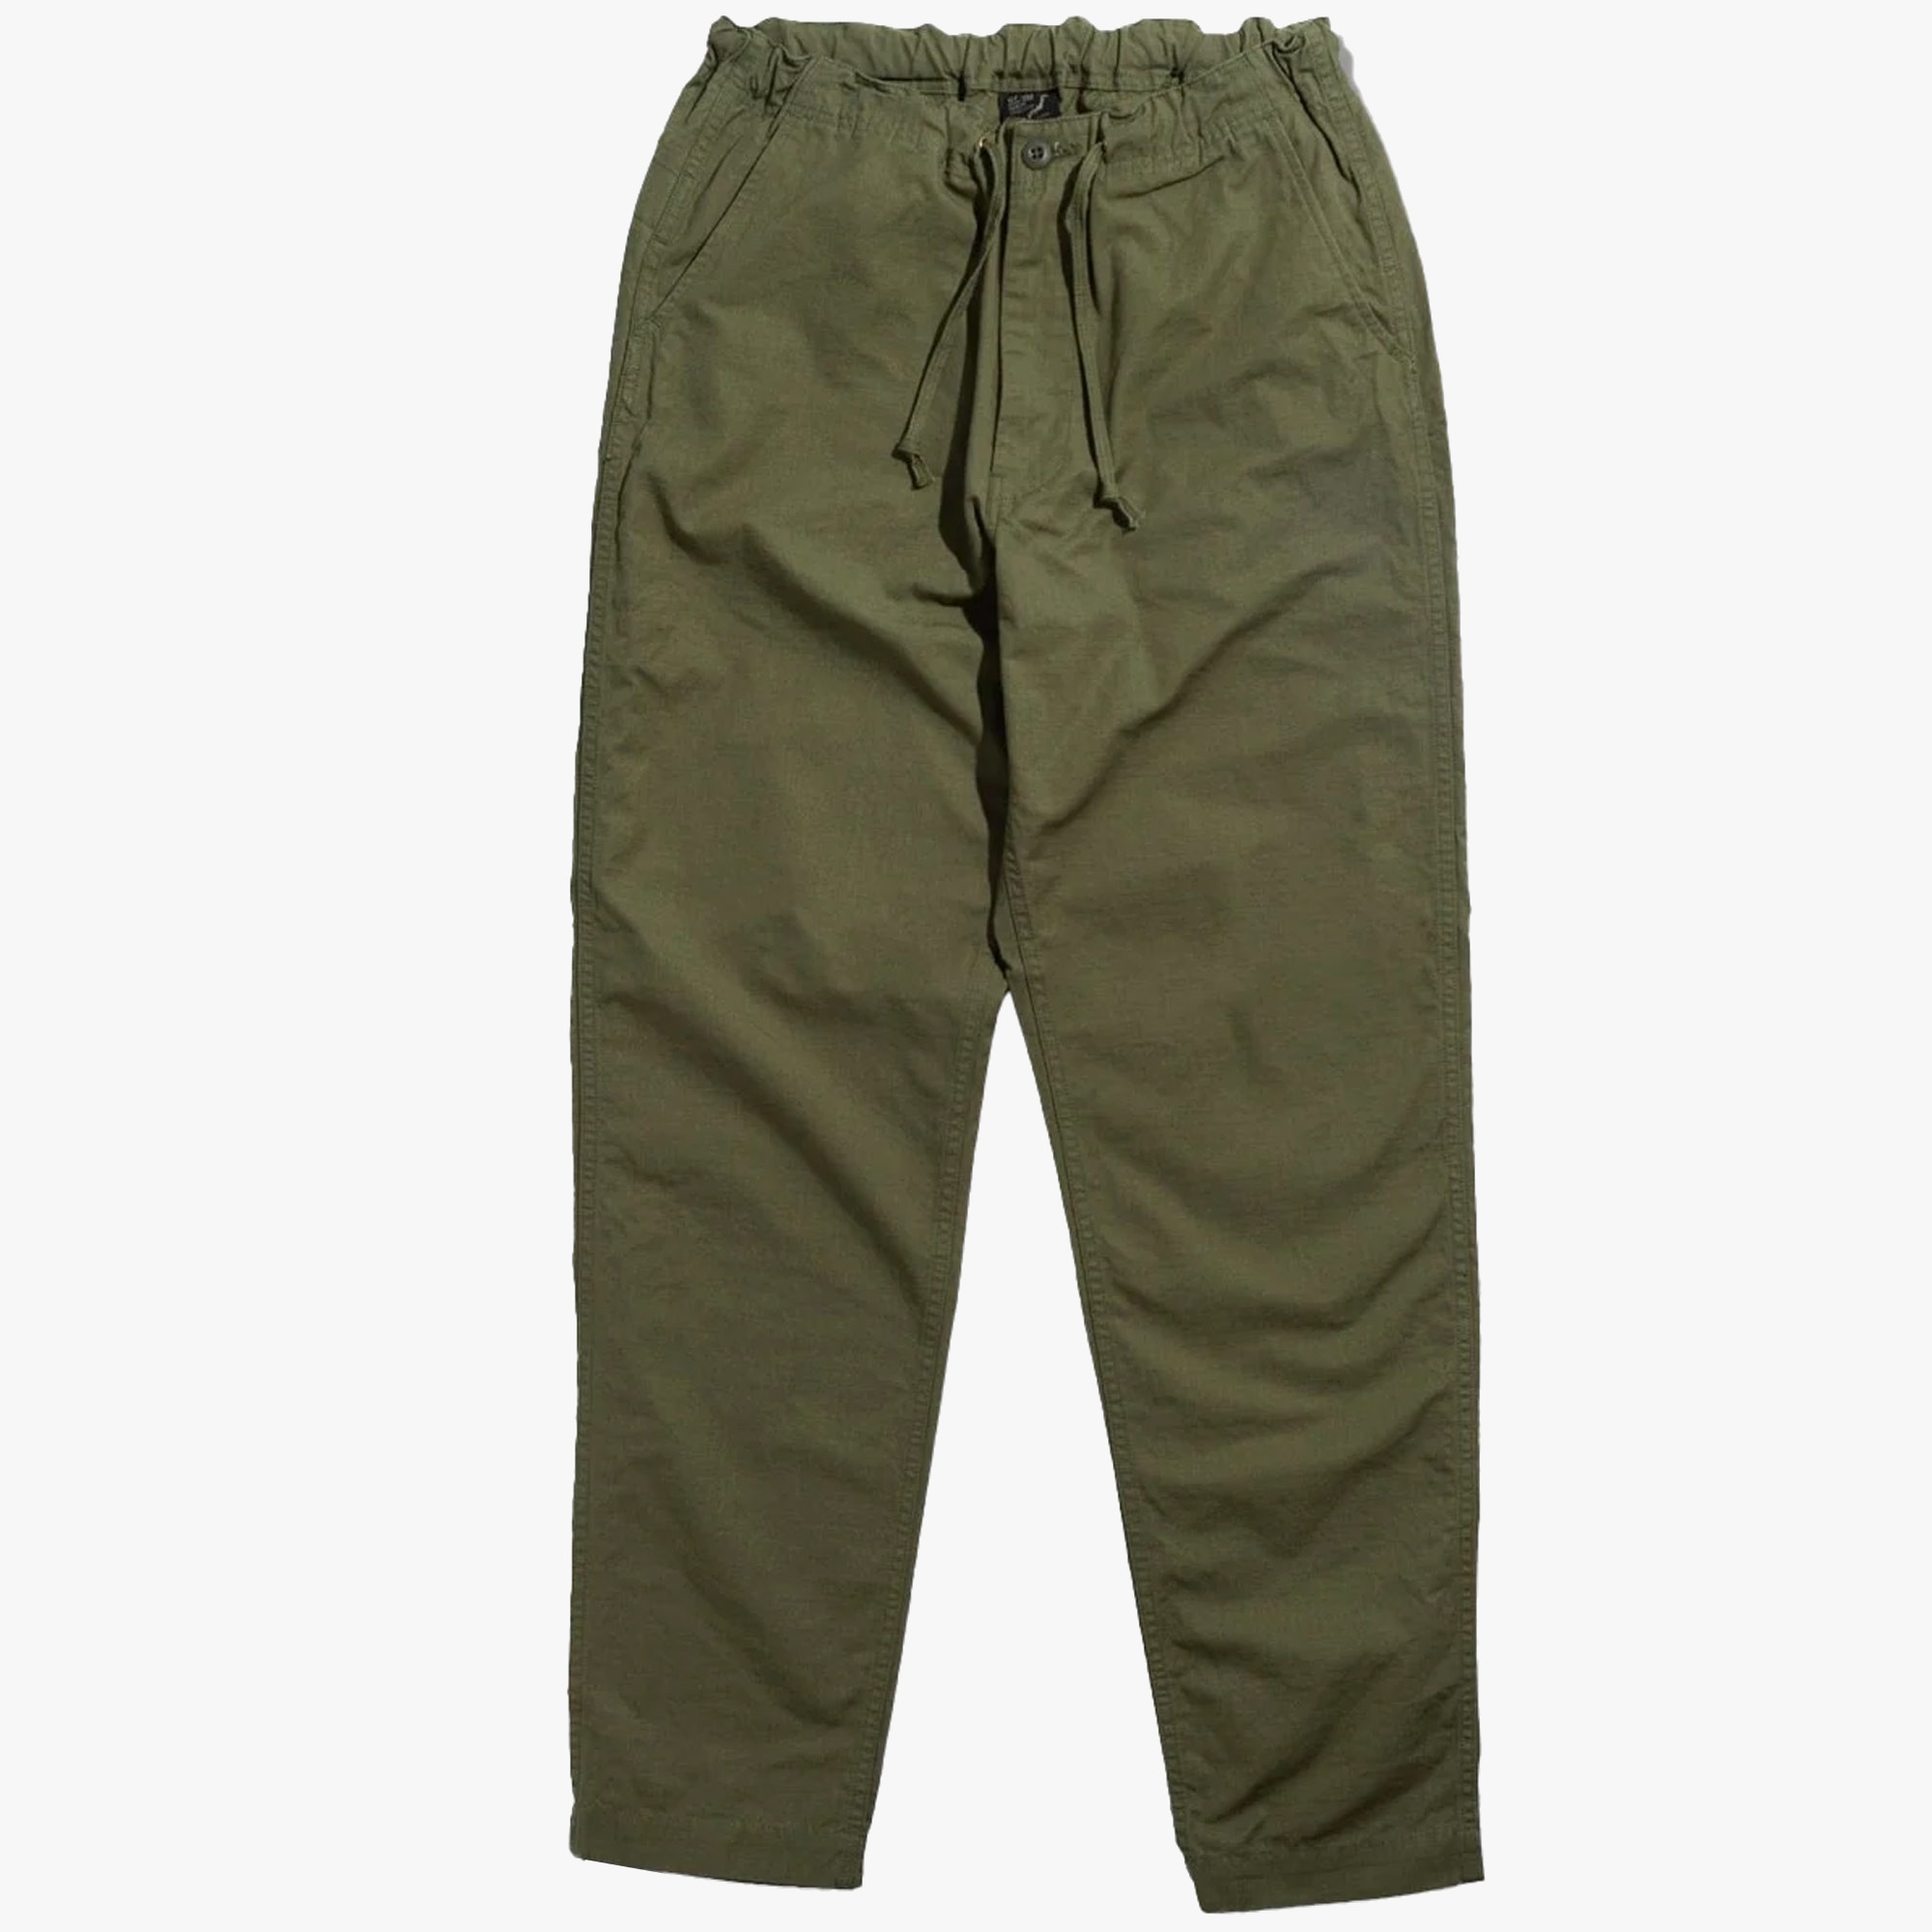 ORSLOW NEW YORKER TAPERED PANTS ARMY GREEN